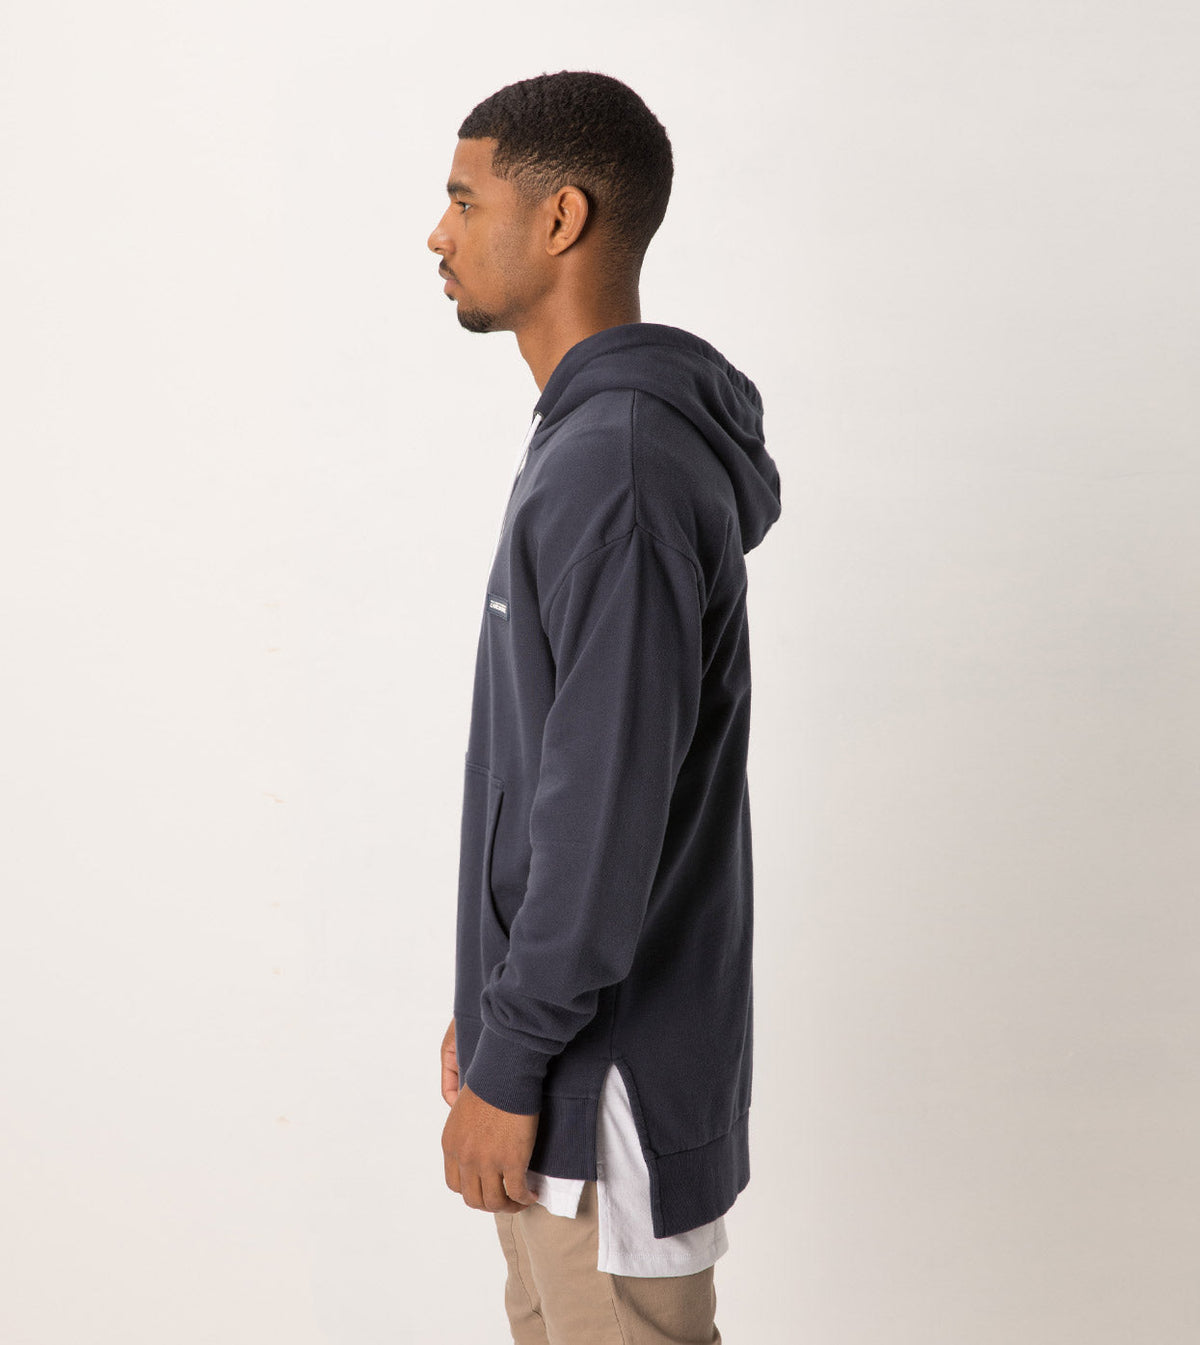 Quality, well-made, Brand Rugger Hood Sweat Duke Blue ZANEROBE X at best  Prices